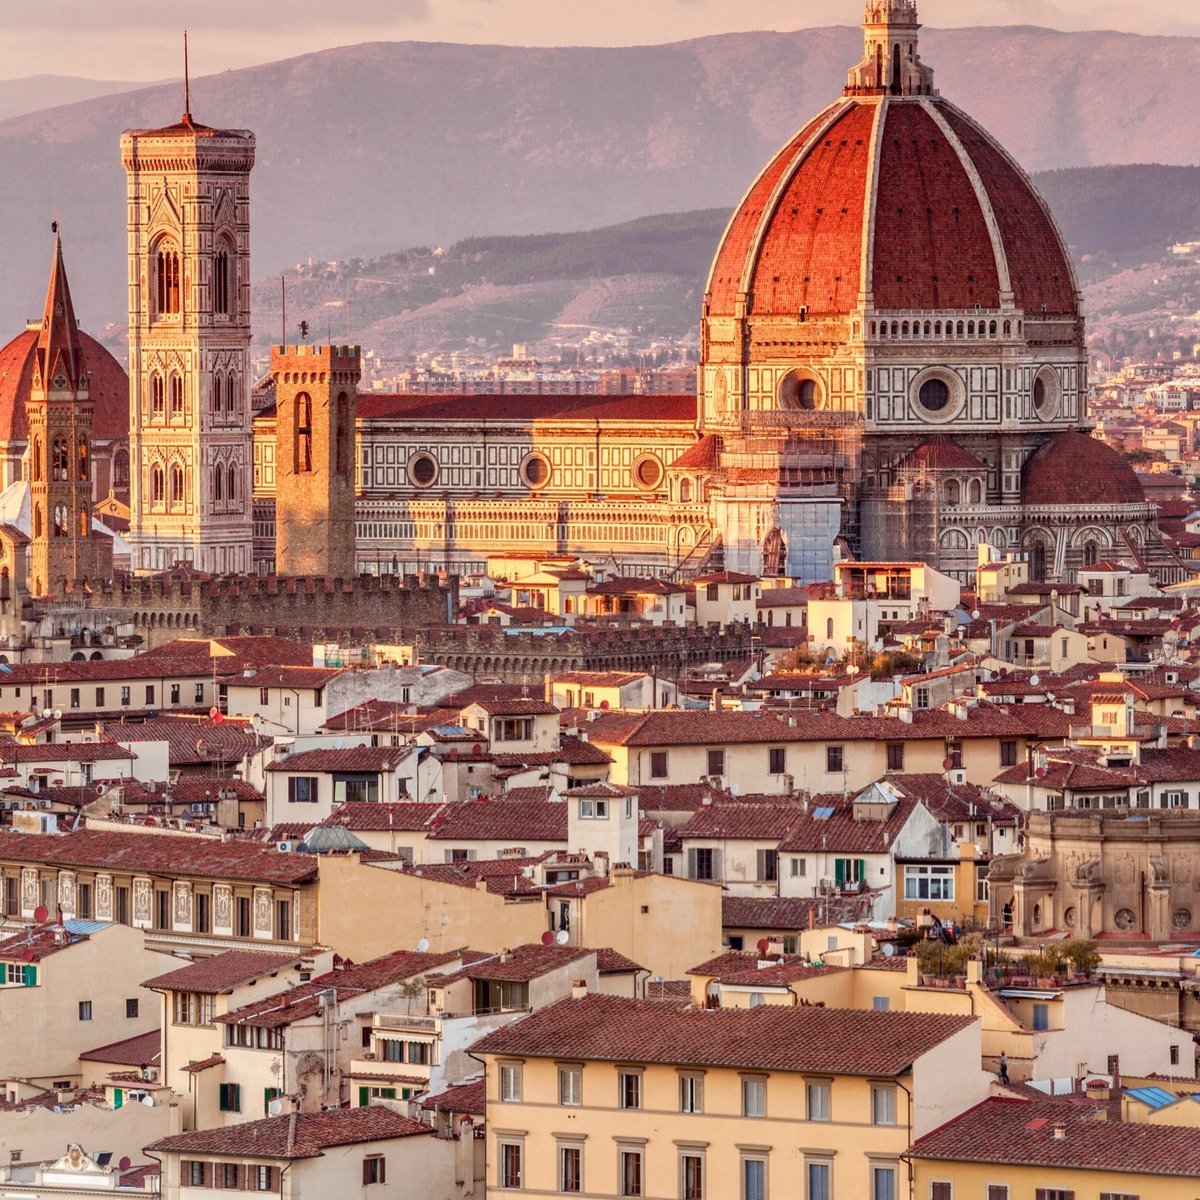 Explore Florence with your group!